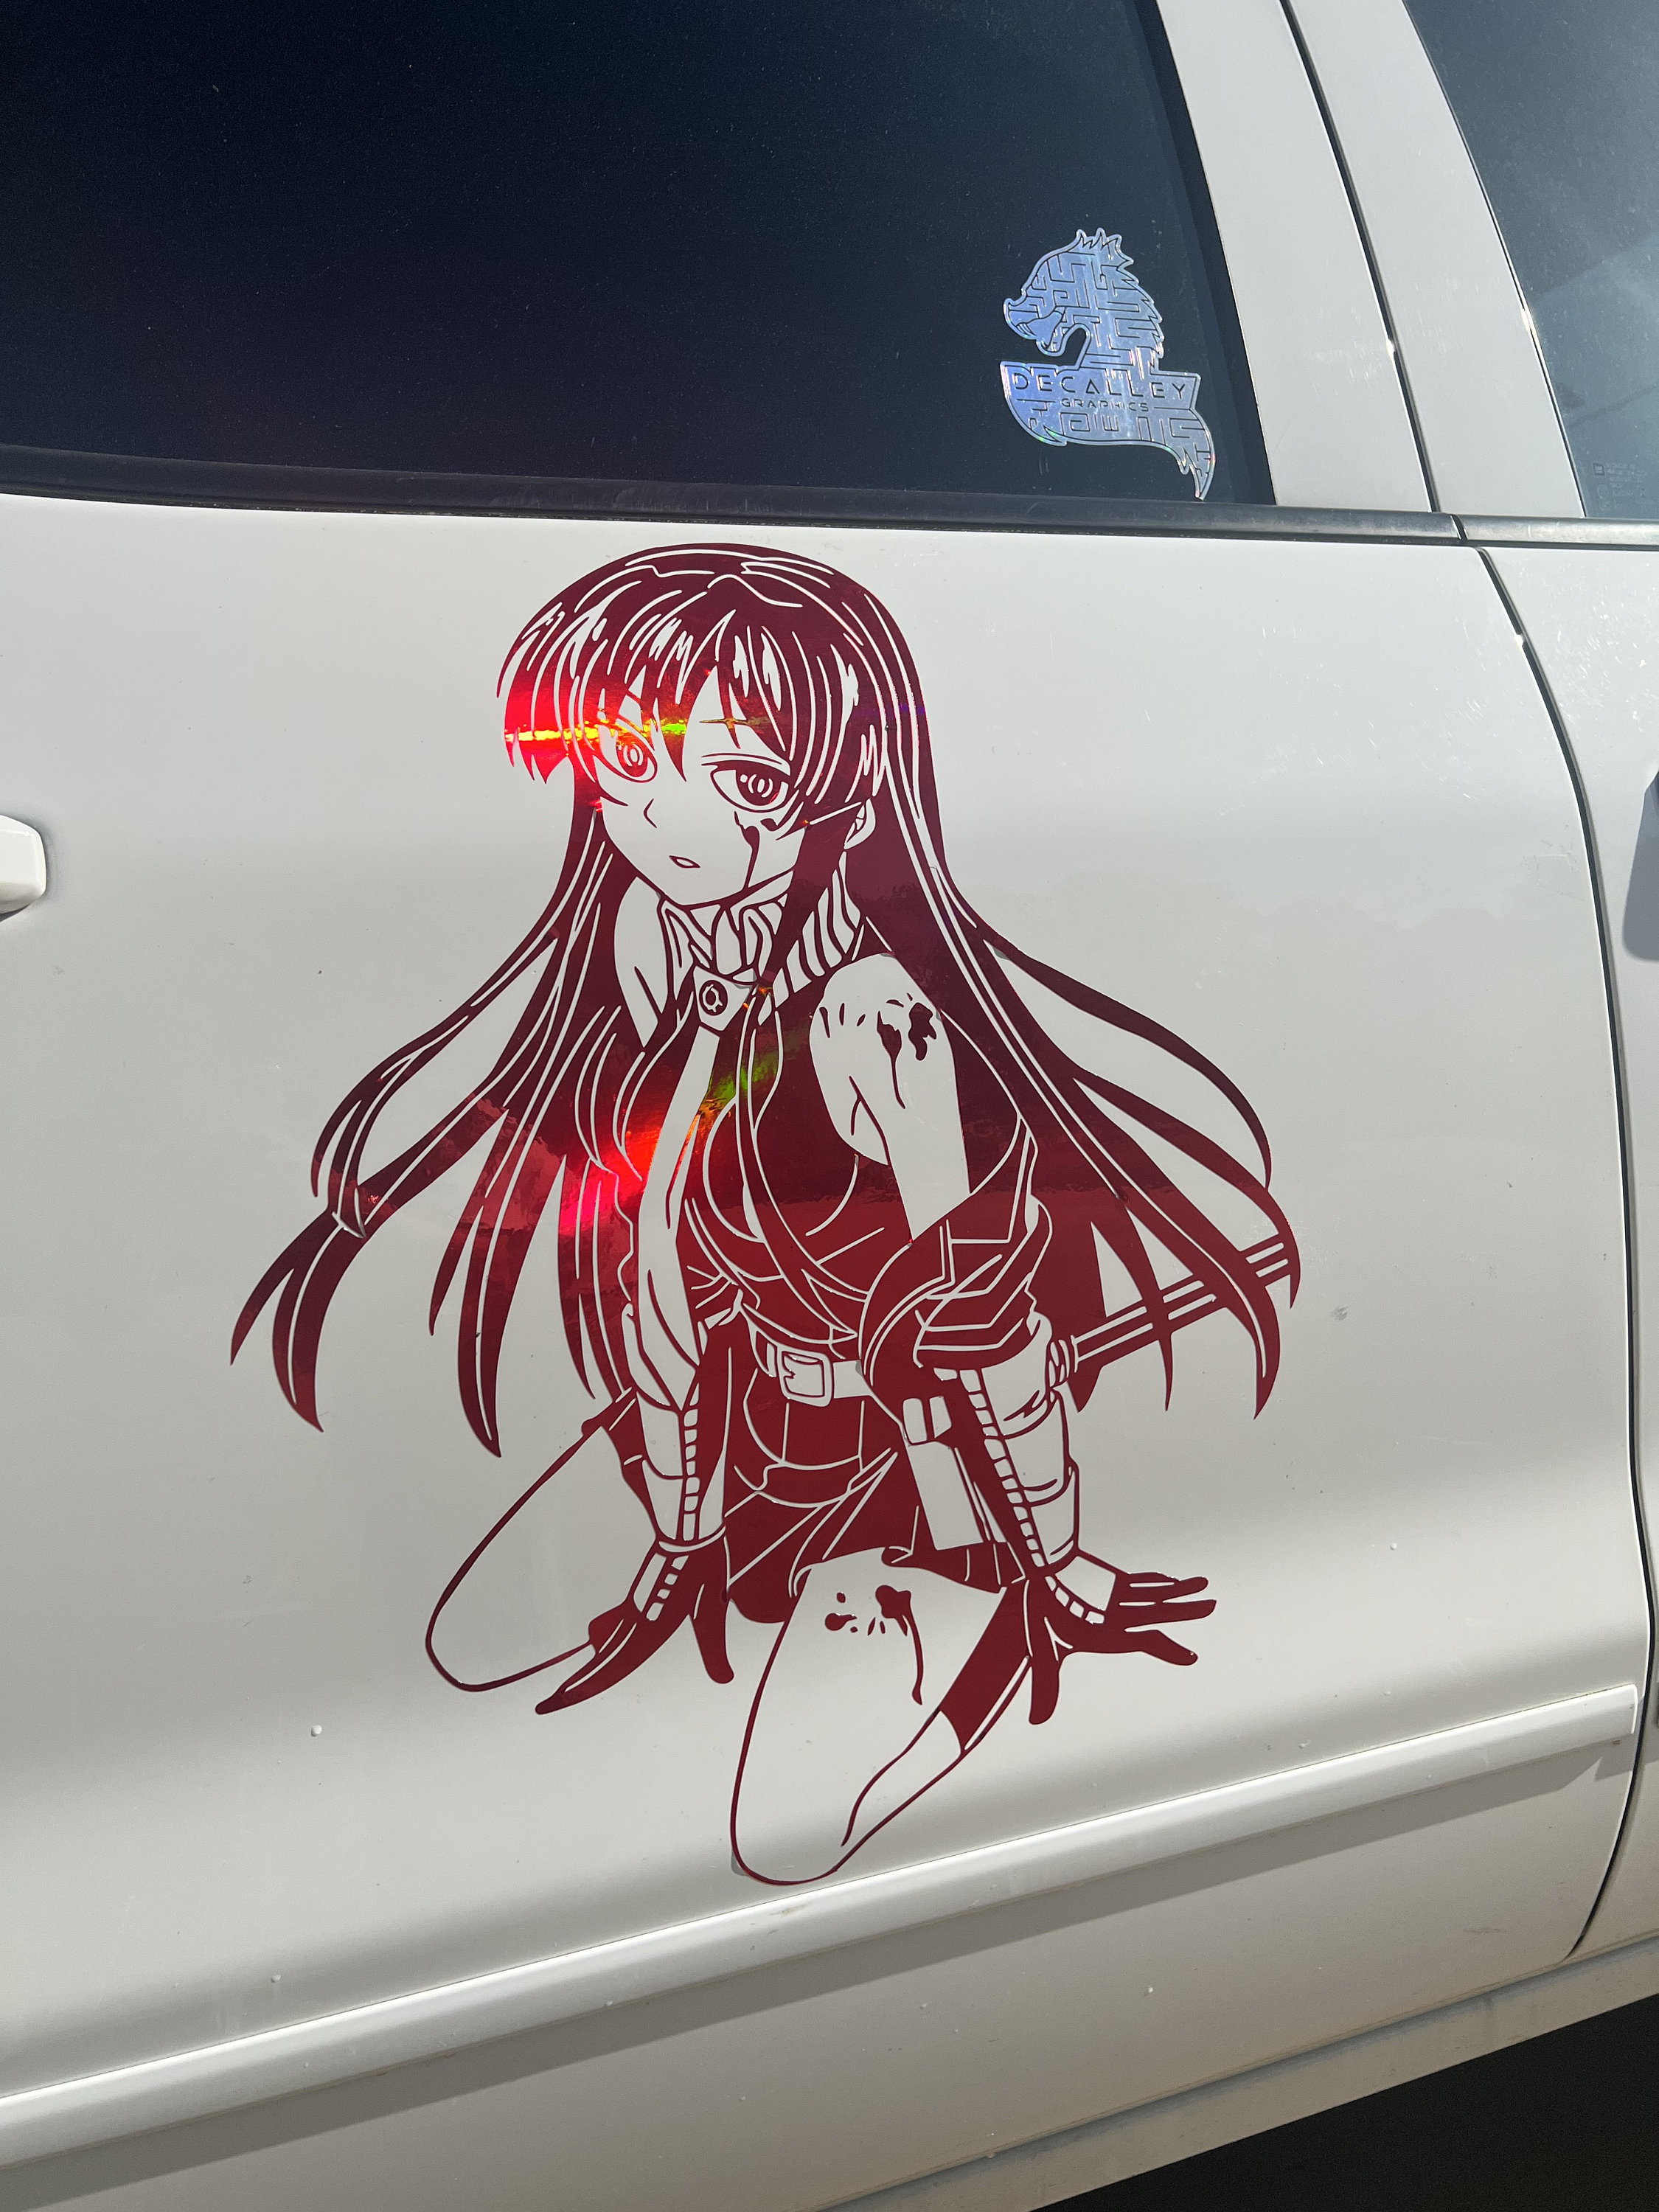 Billy drunkenly puts Anime Stickers on his car  YouTube